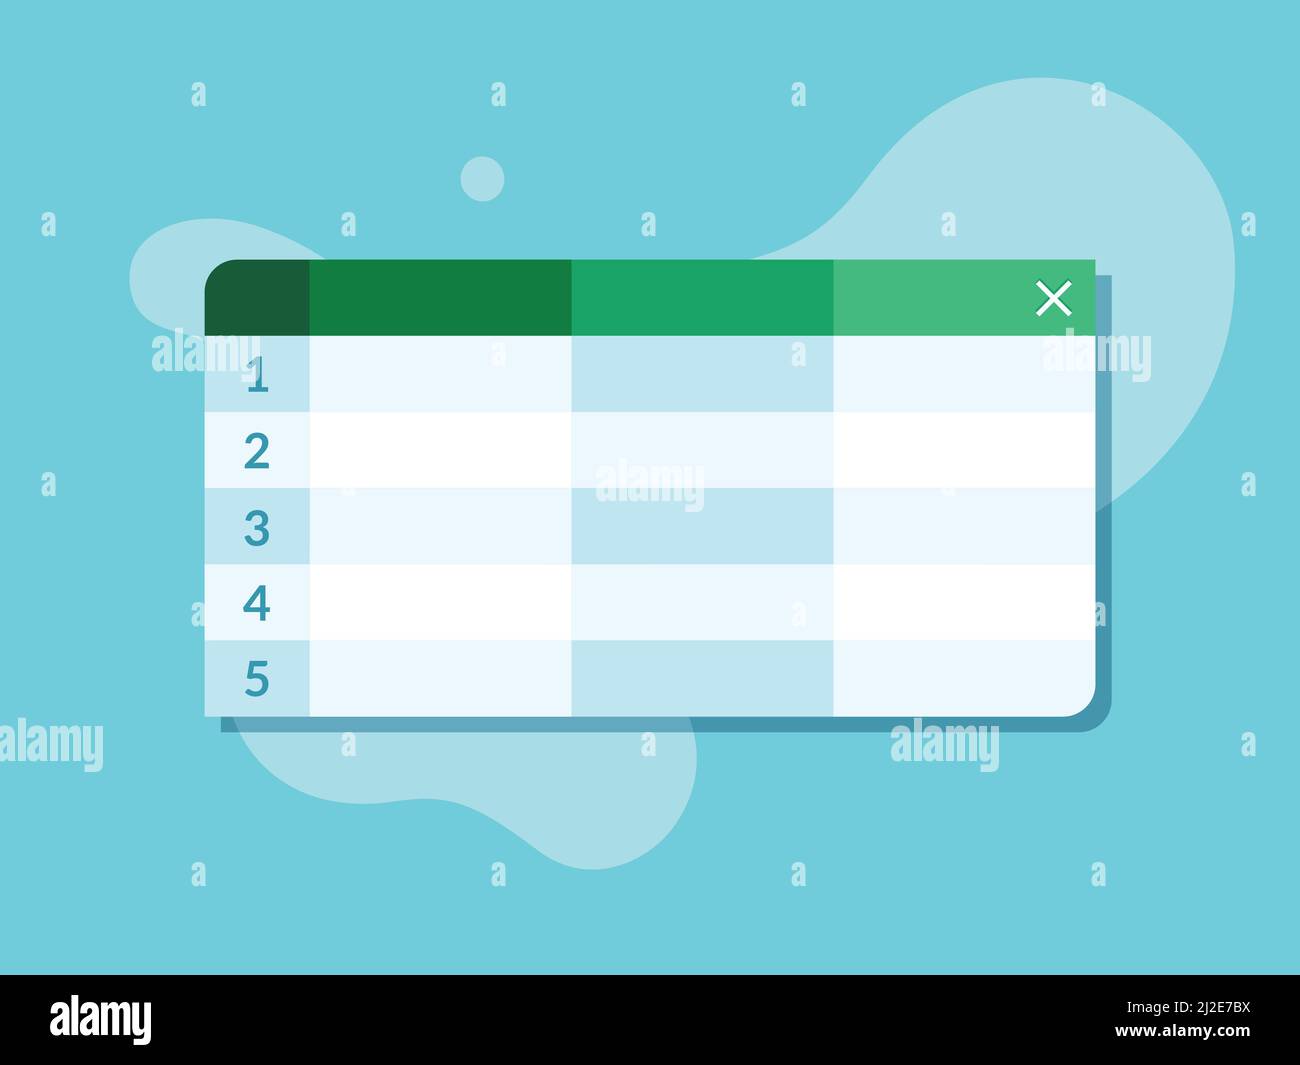 Spreadsheet tables app flat design vector. Worksheet application in green and blue colors, depicting title bar, column and rows with numbers. Stock Vector